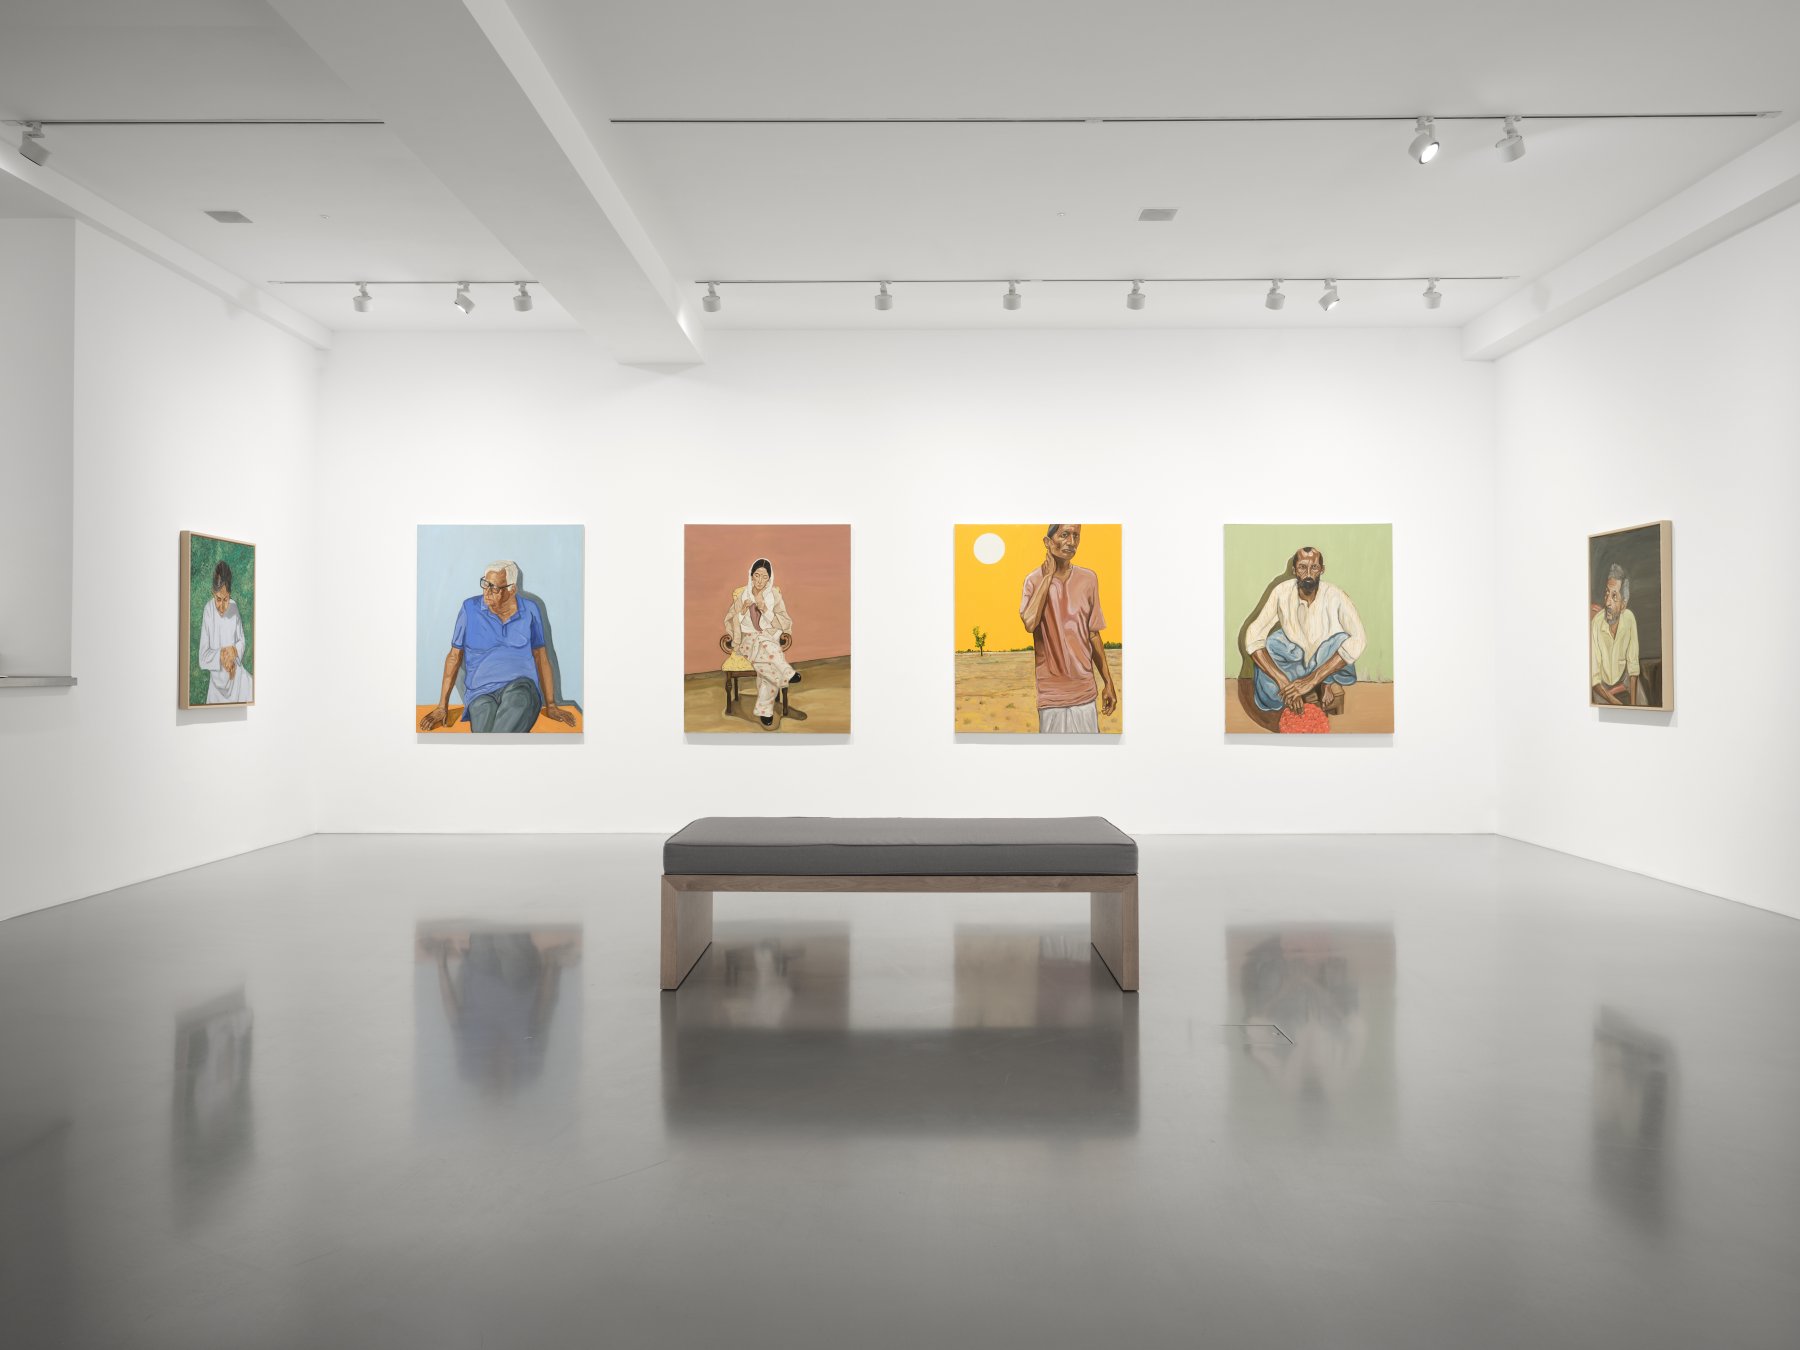 Installation image for Raghav Babbar: New Paintings, at Nahmad Projects